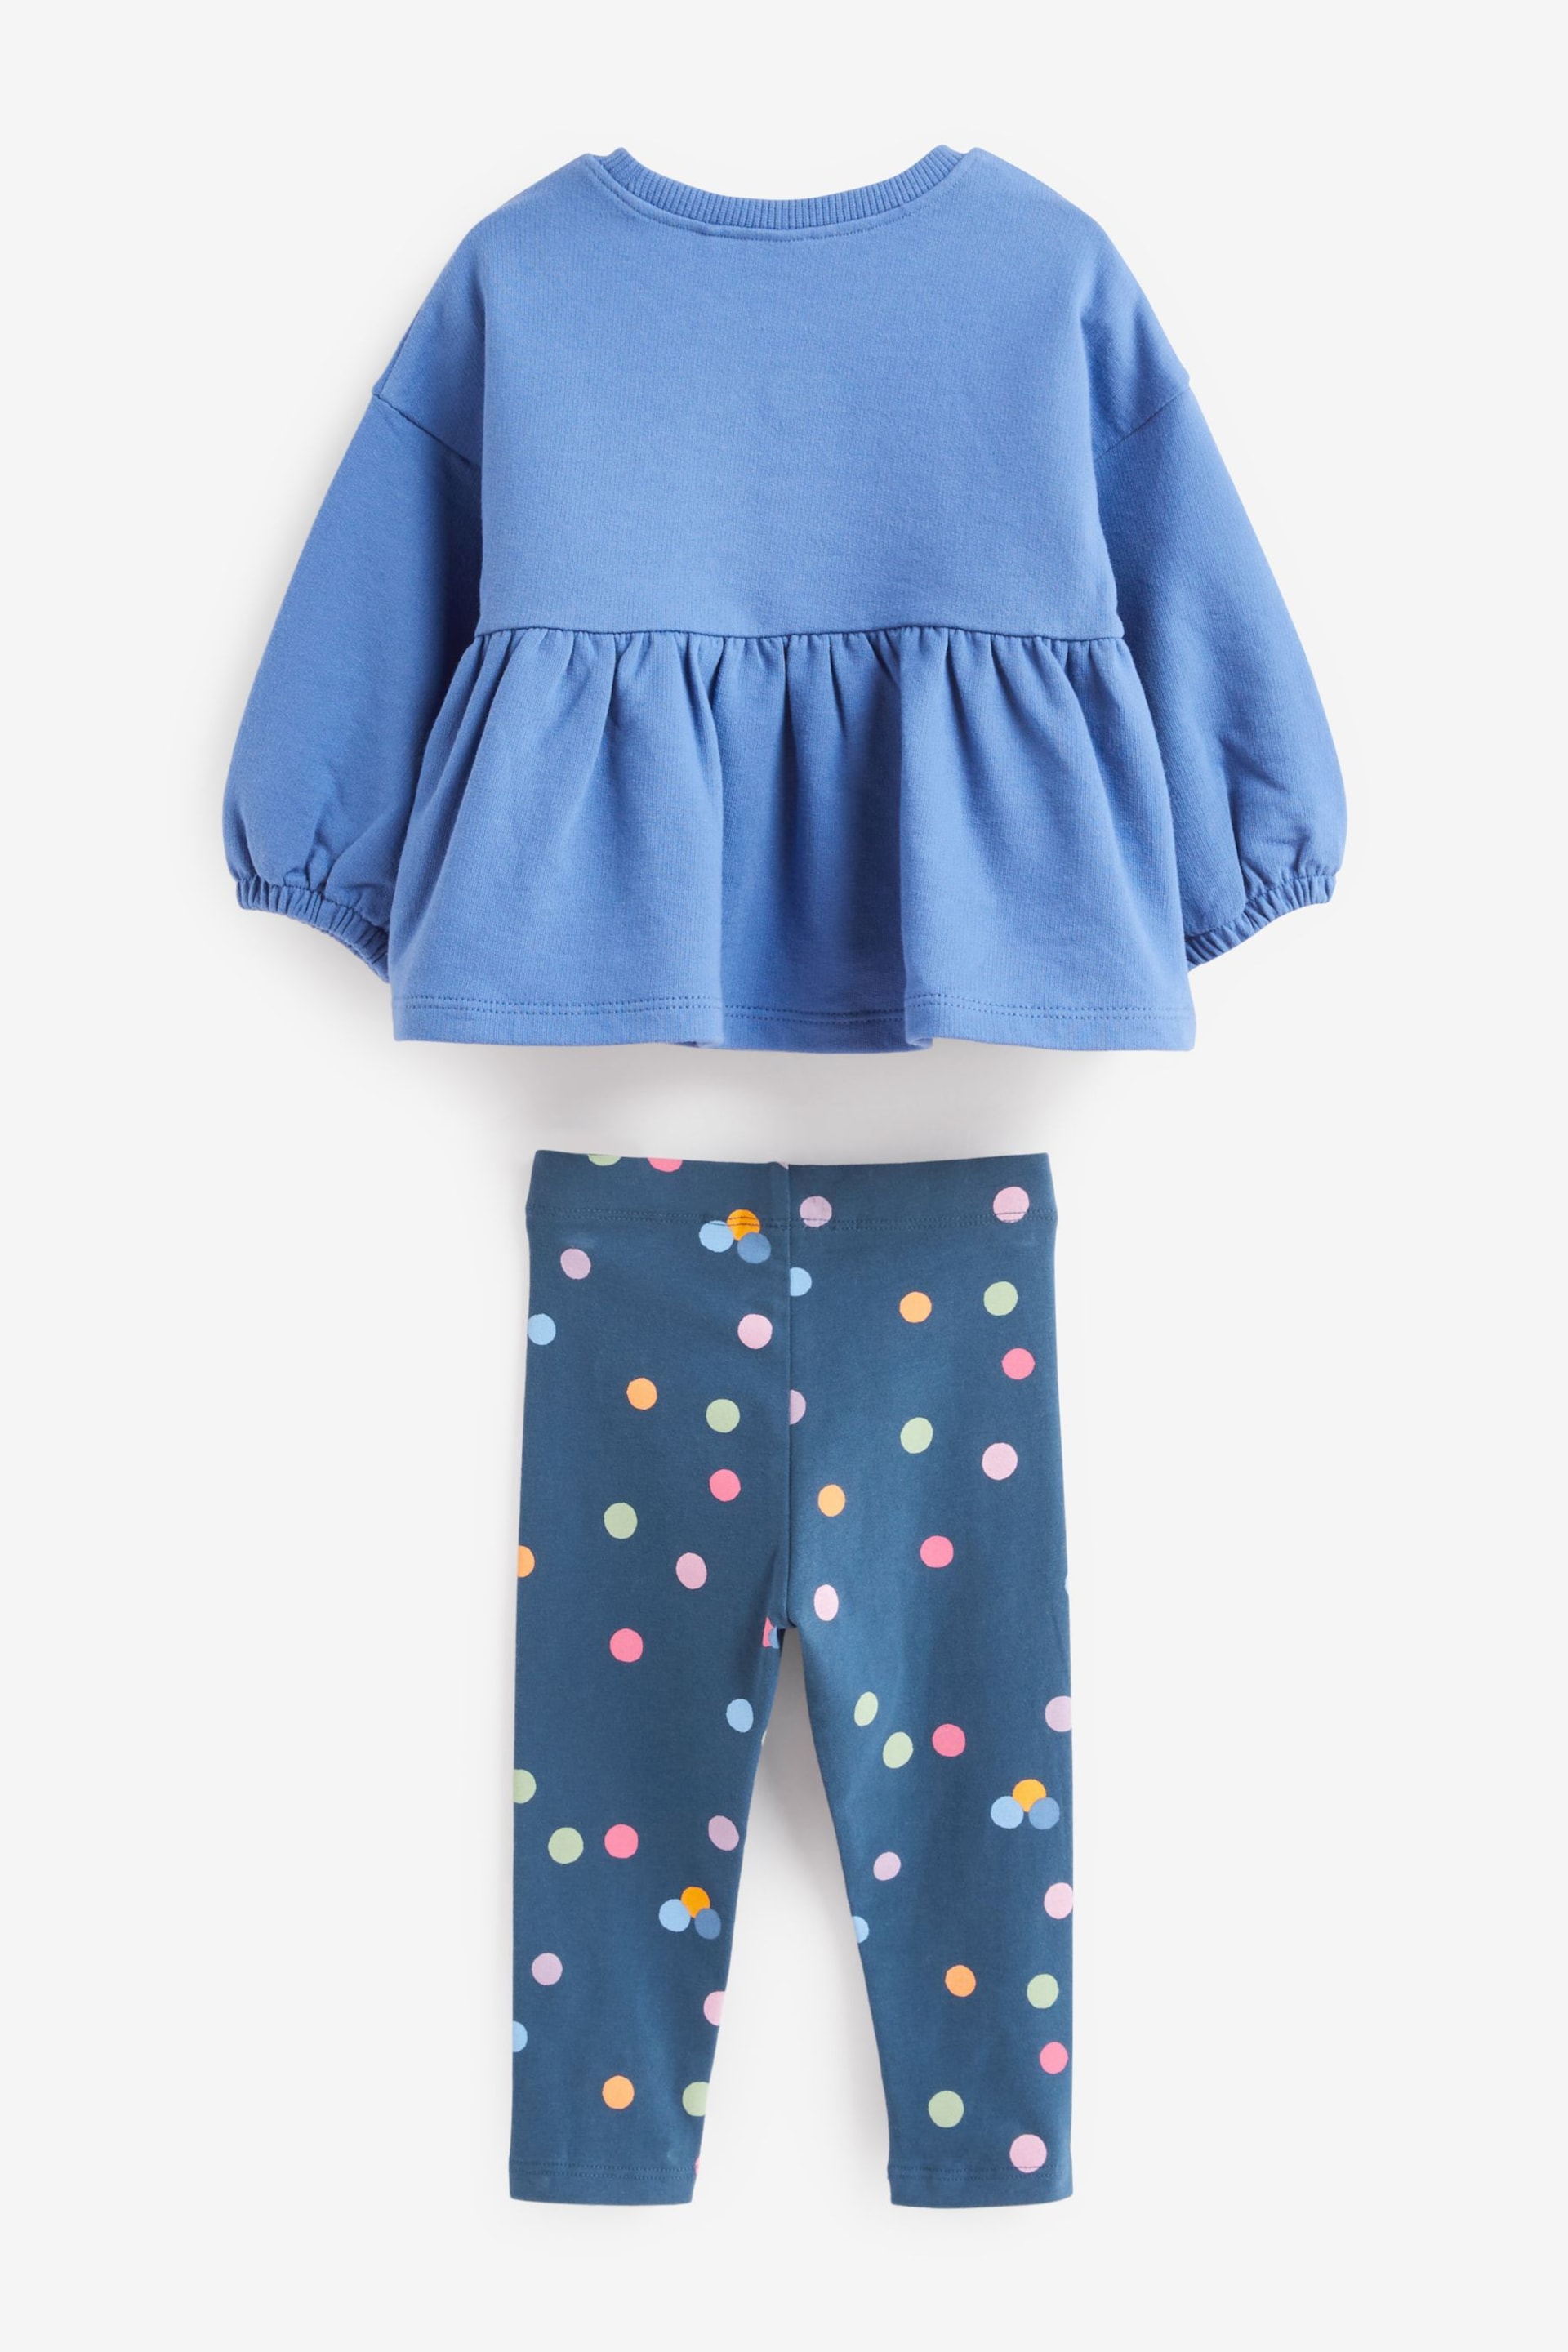 Navy Rainbow Top and Legging Set (3mths-7yrs) - Image 6 of 6